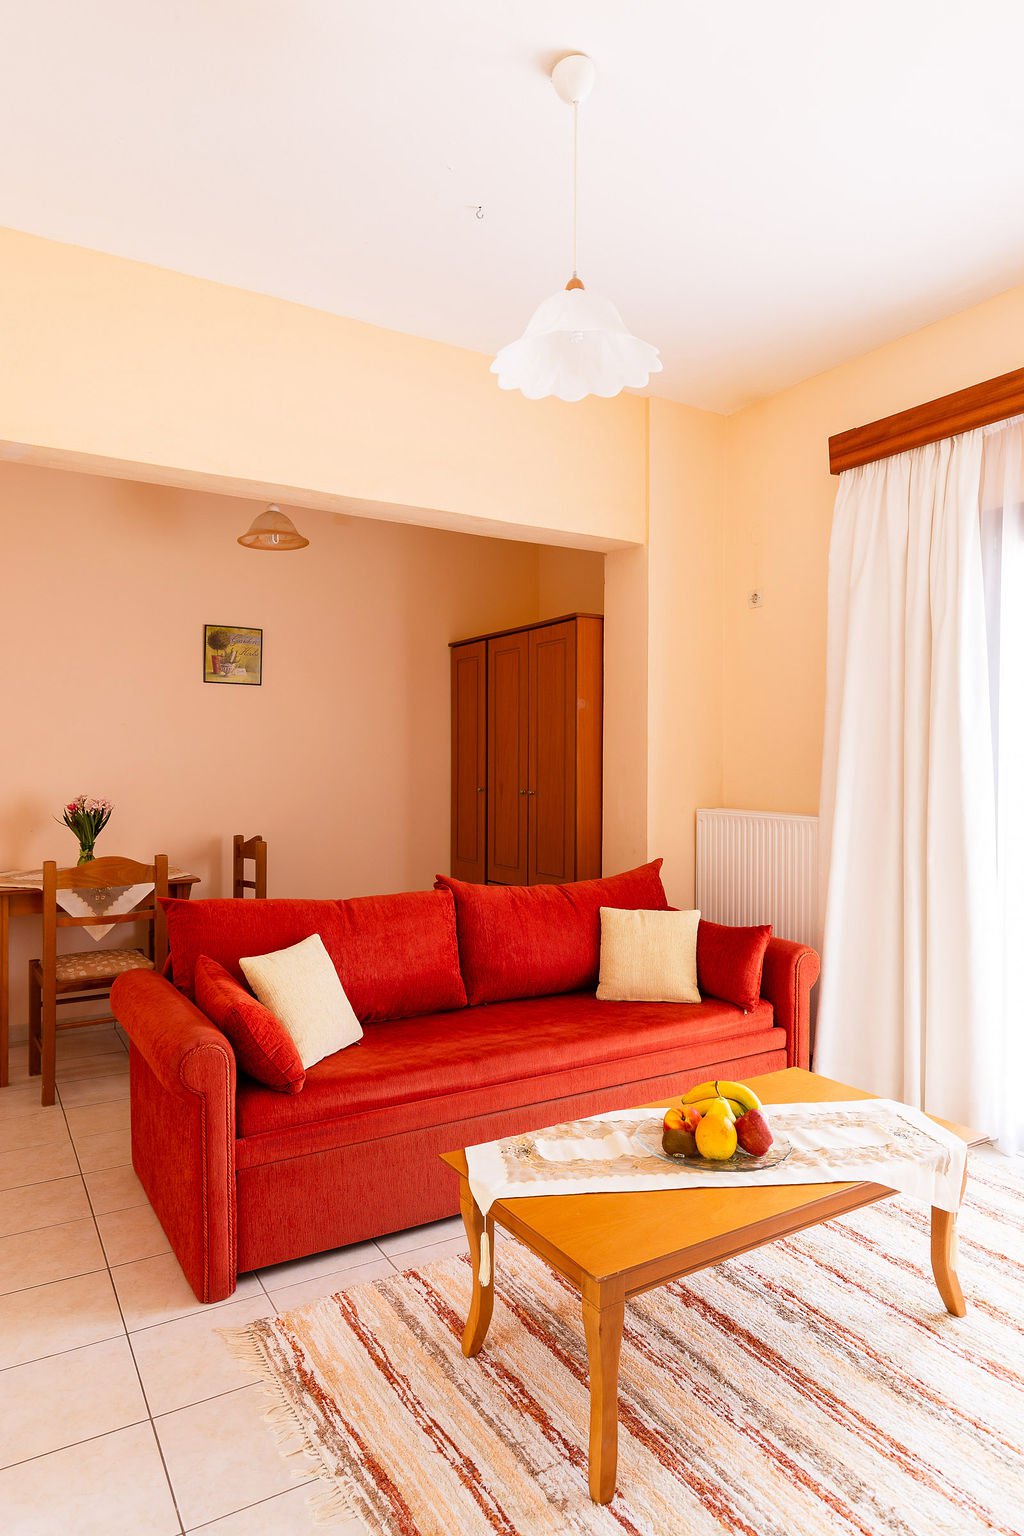 Accommodation in Corfu, Houmis Apartment and Studios - Apatrment No.  17